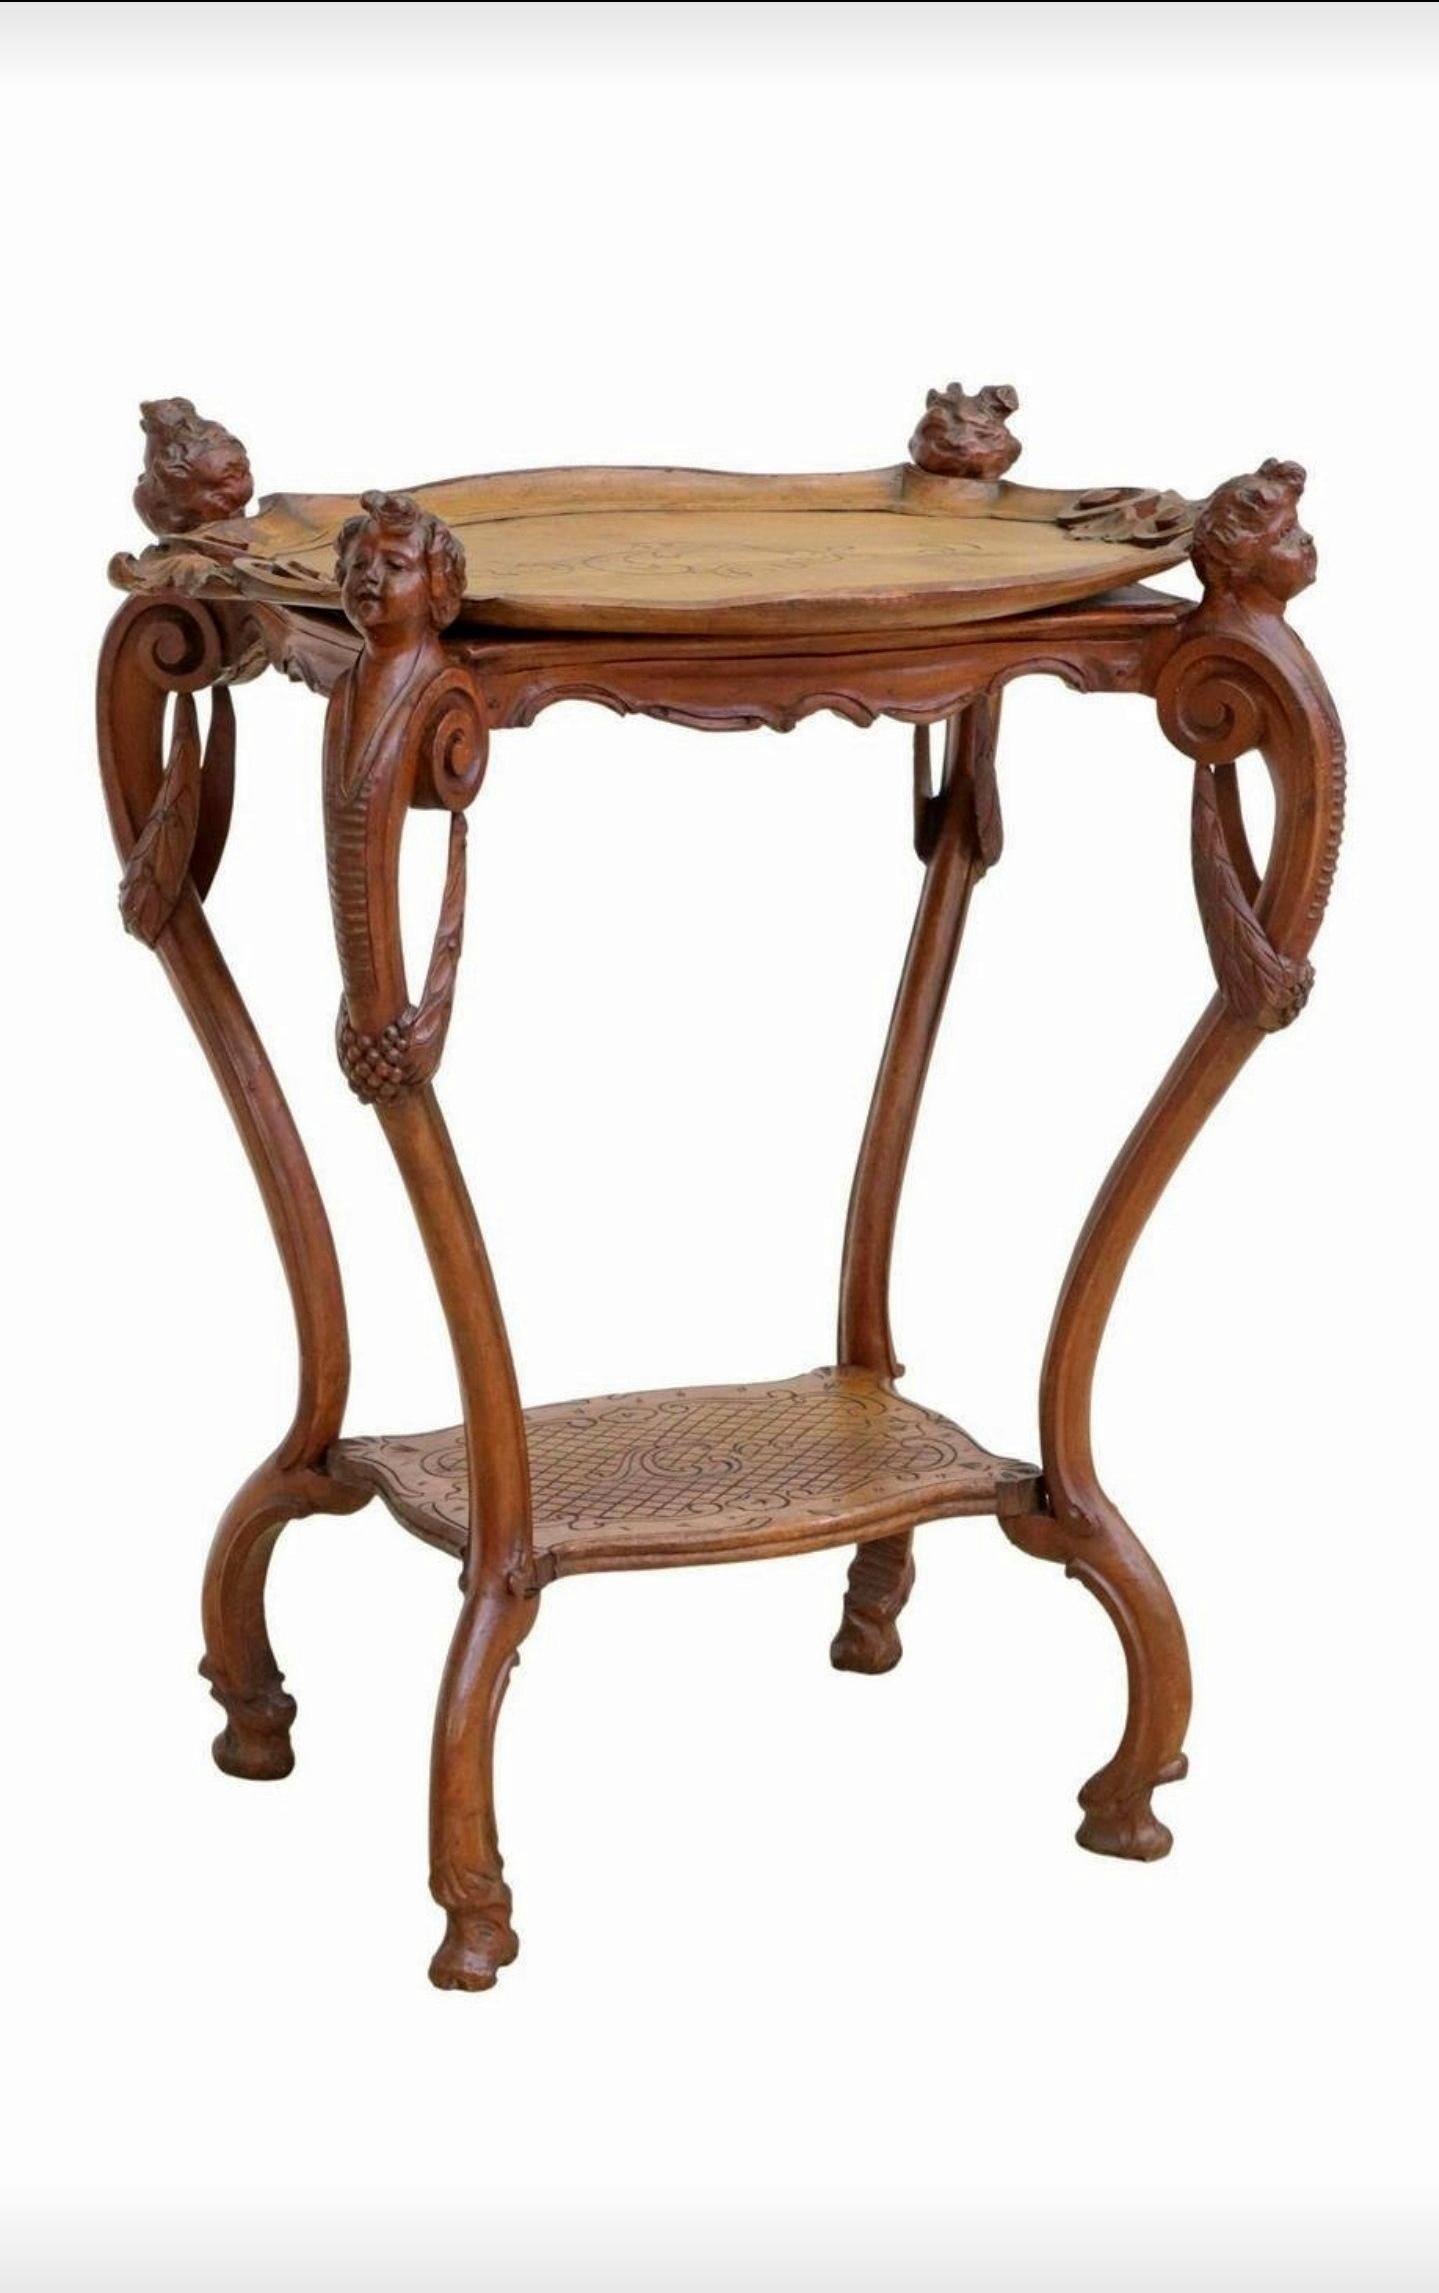 A lovely French Louis XV style hand carved oak two-tier tea / dessert server table with beautifully aged warm patina. circa 1900

Born in France at the turn of the late 19th / early 20th century, exceptionally executed in sophisticated Louis 15th